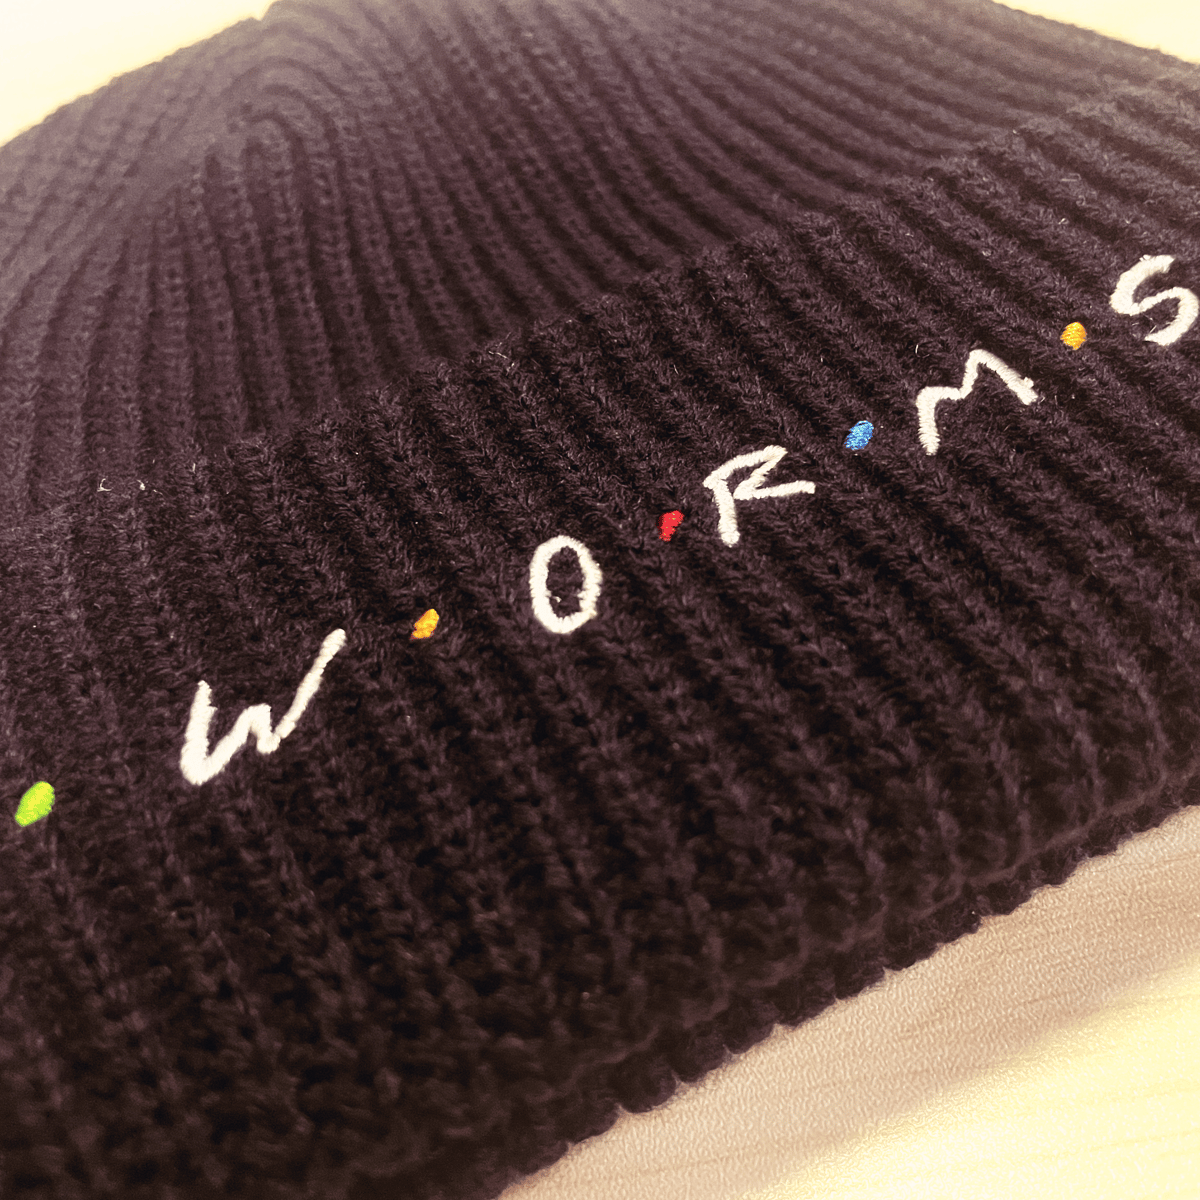 Image of WORMS Hat